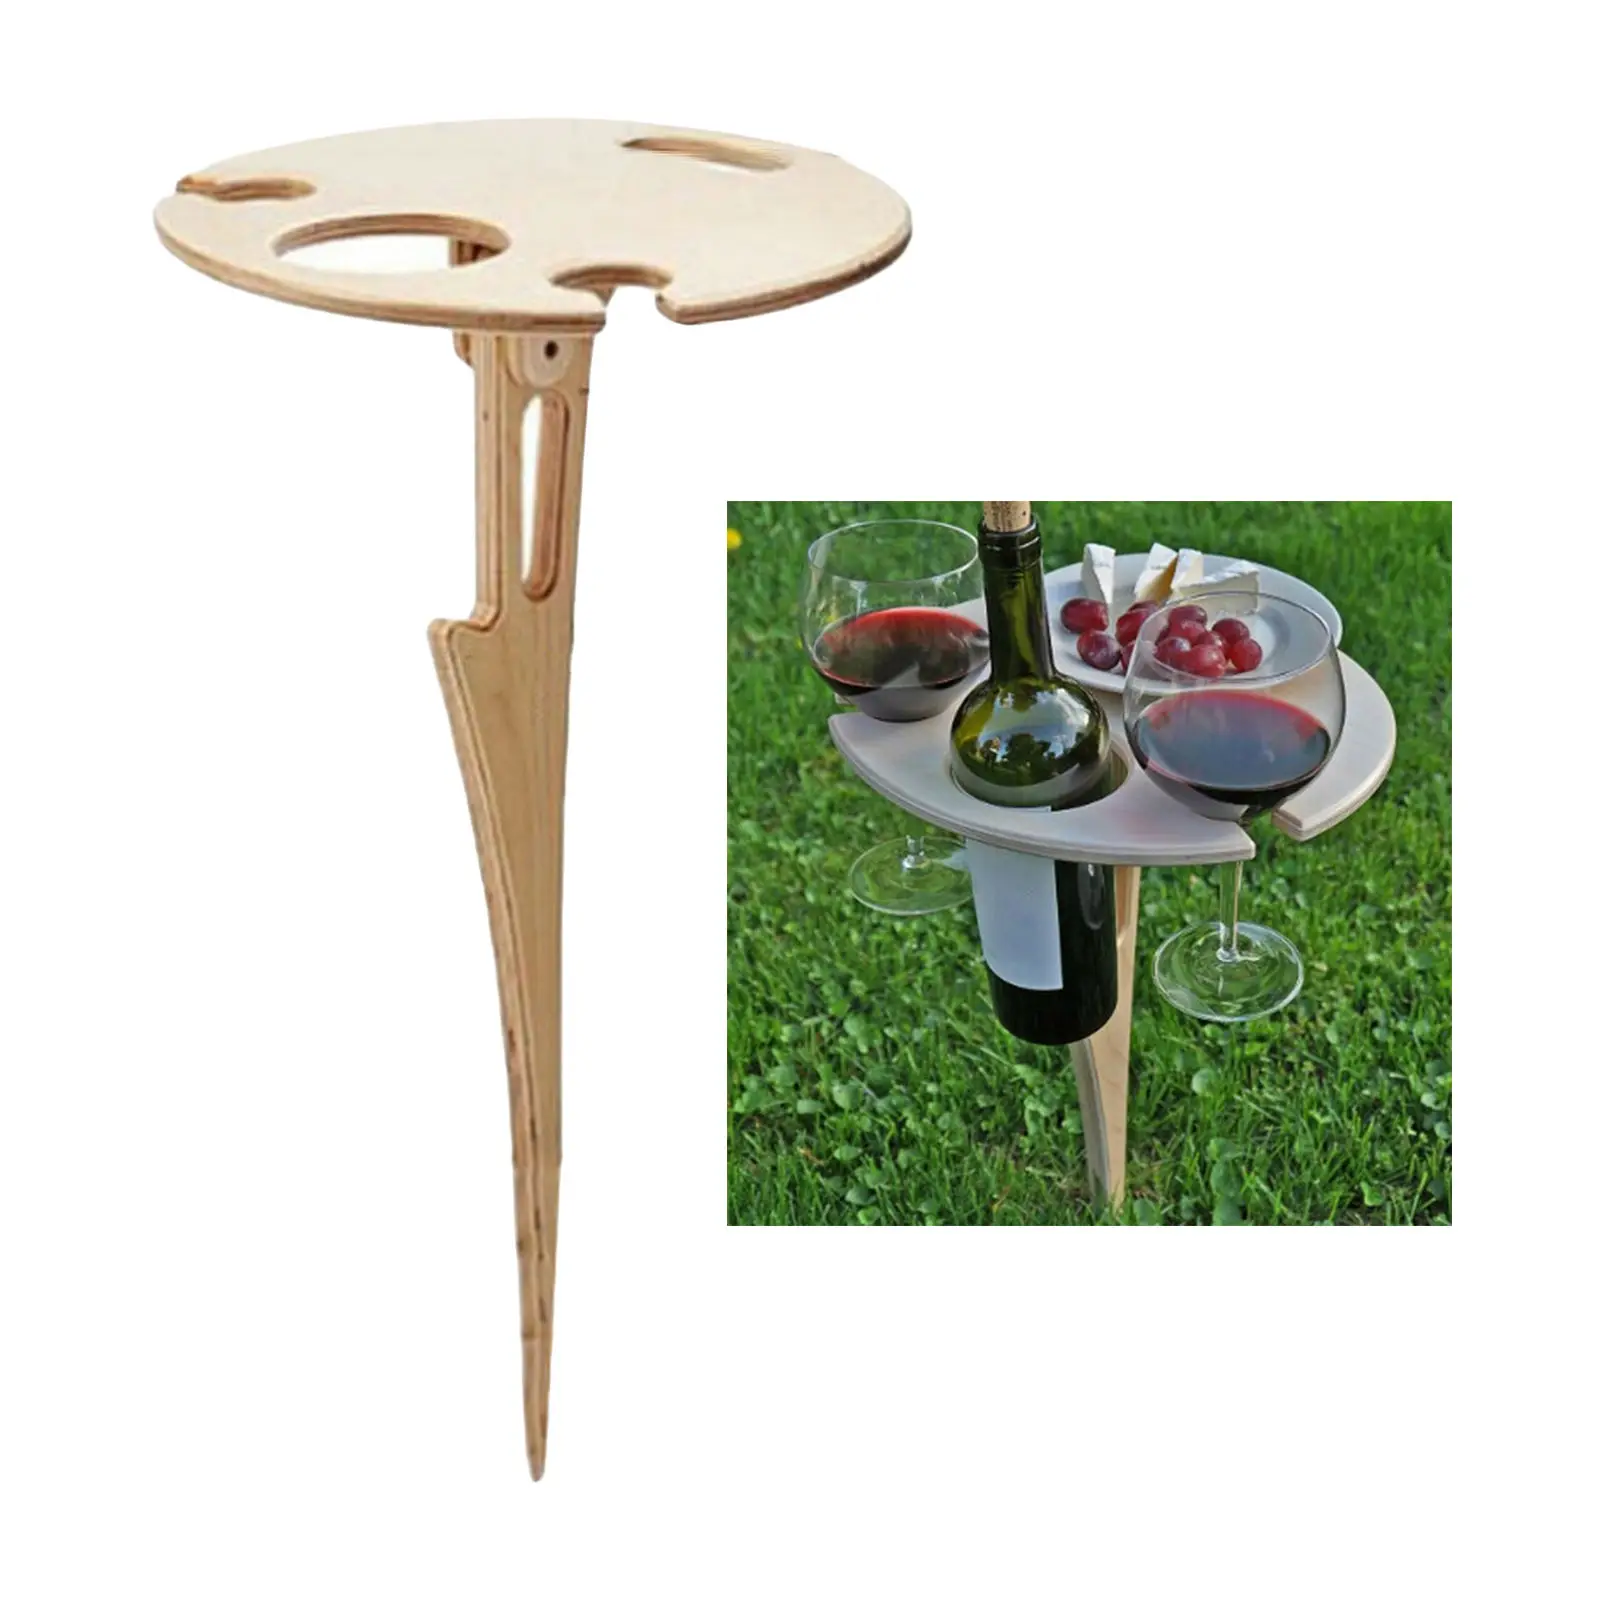 Portable Outdoor Wine Table, Beach Sand Grass Wooden Wine Bottles Wine Cups Support Rack Holder, Snack & Cheese Tray